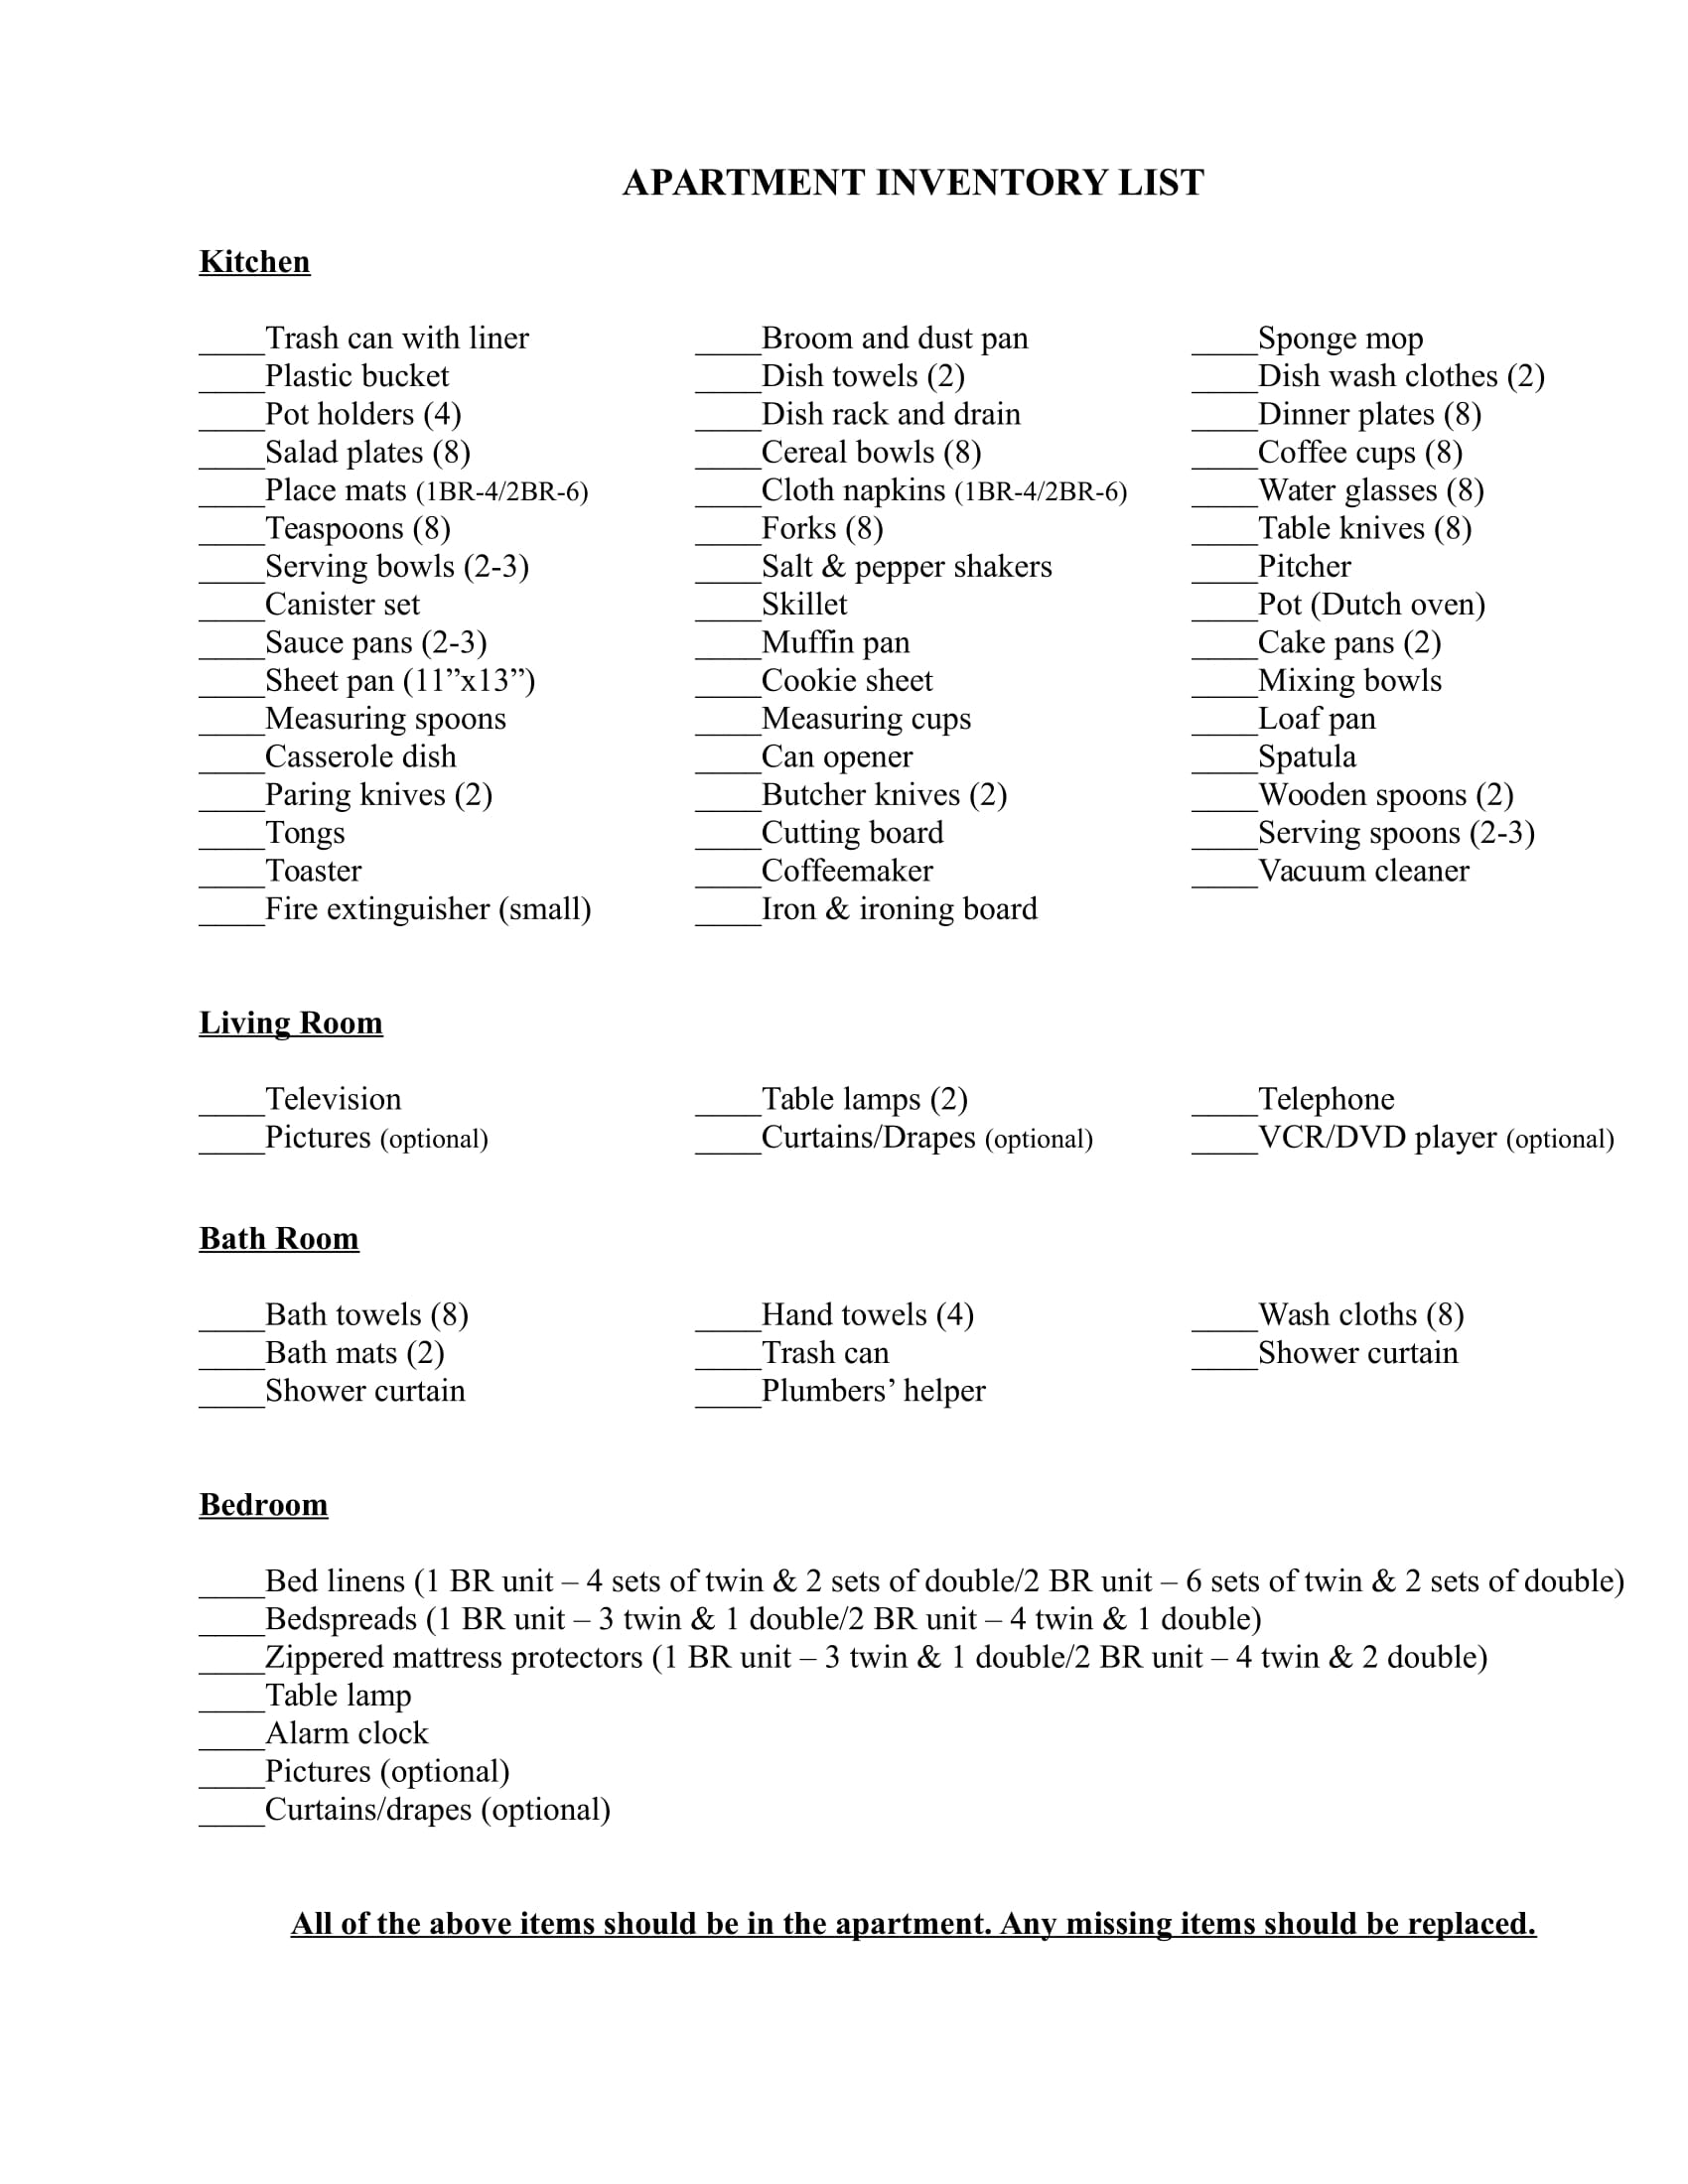 apartment inventory list example